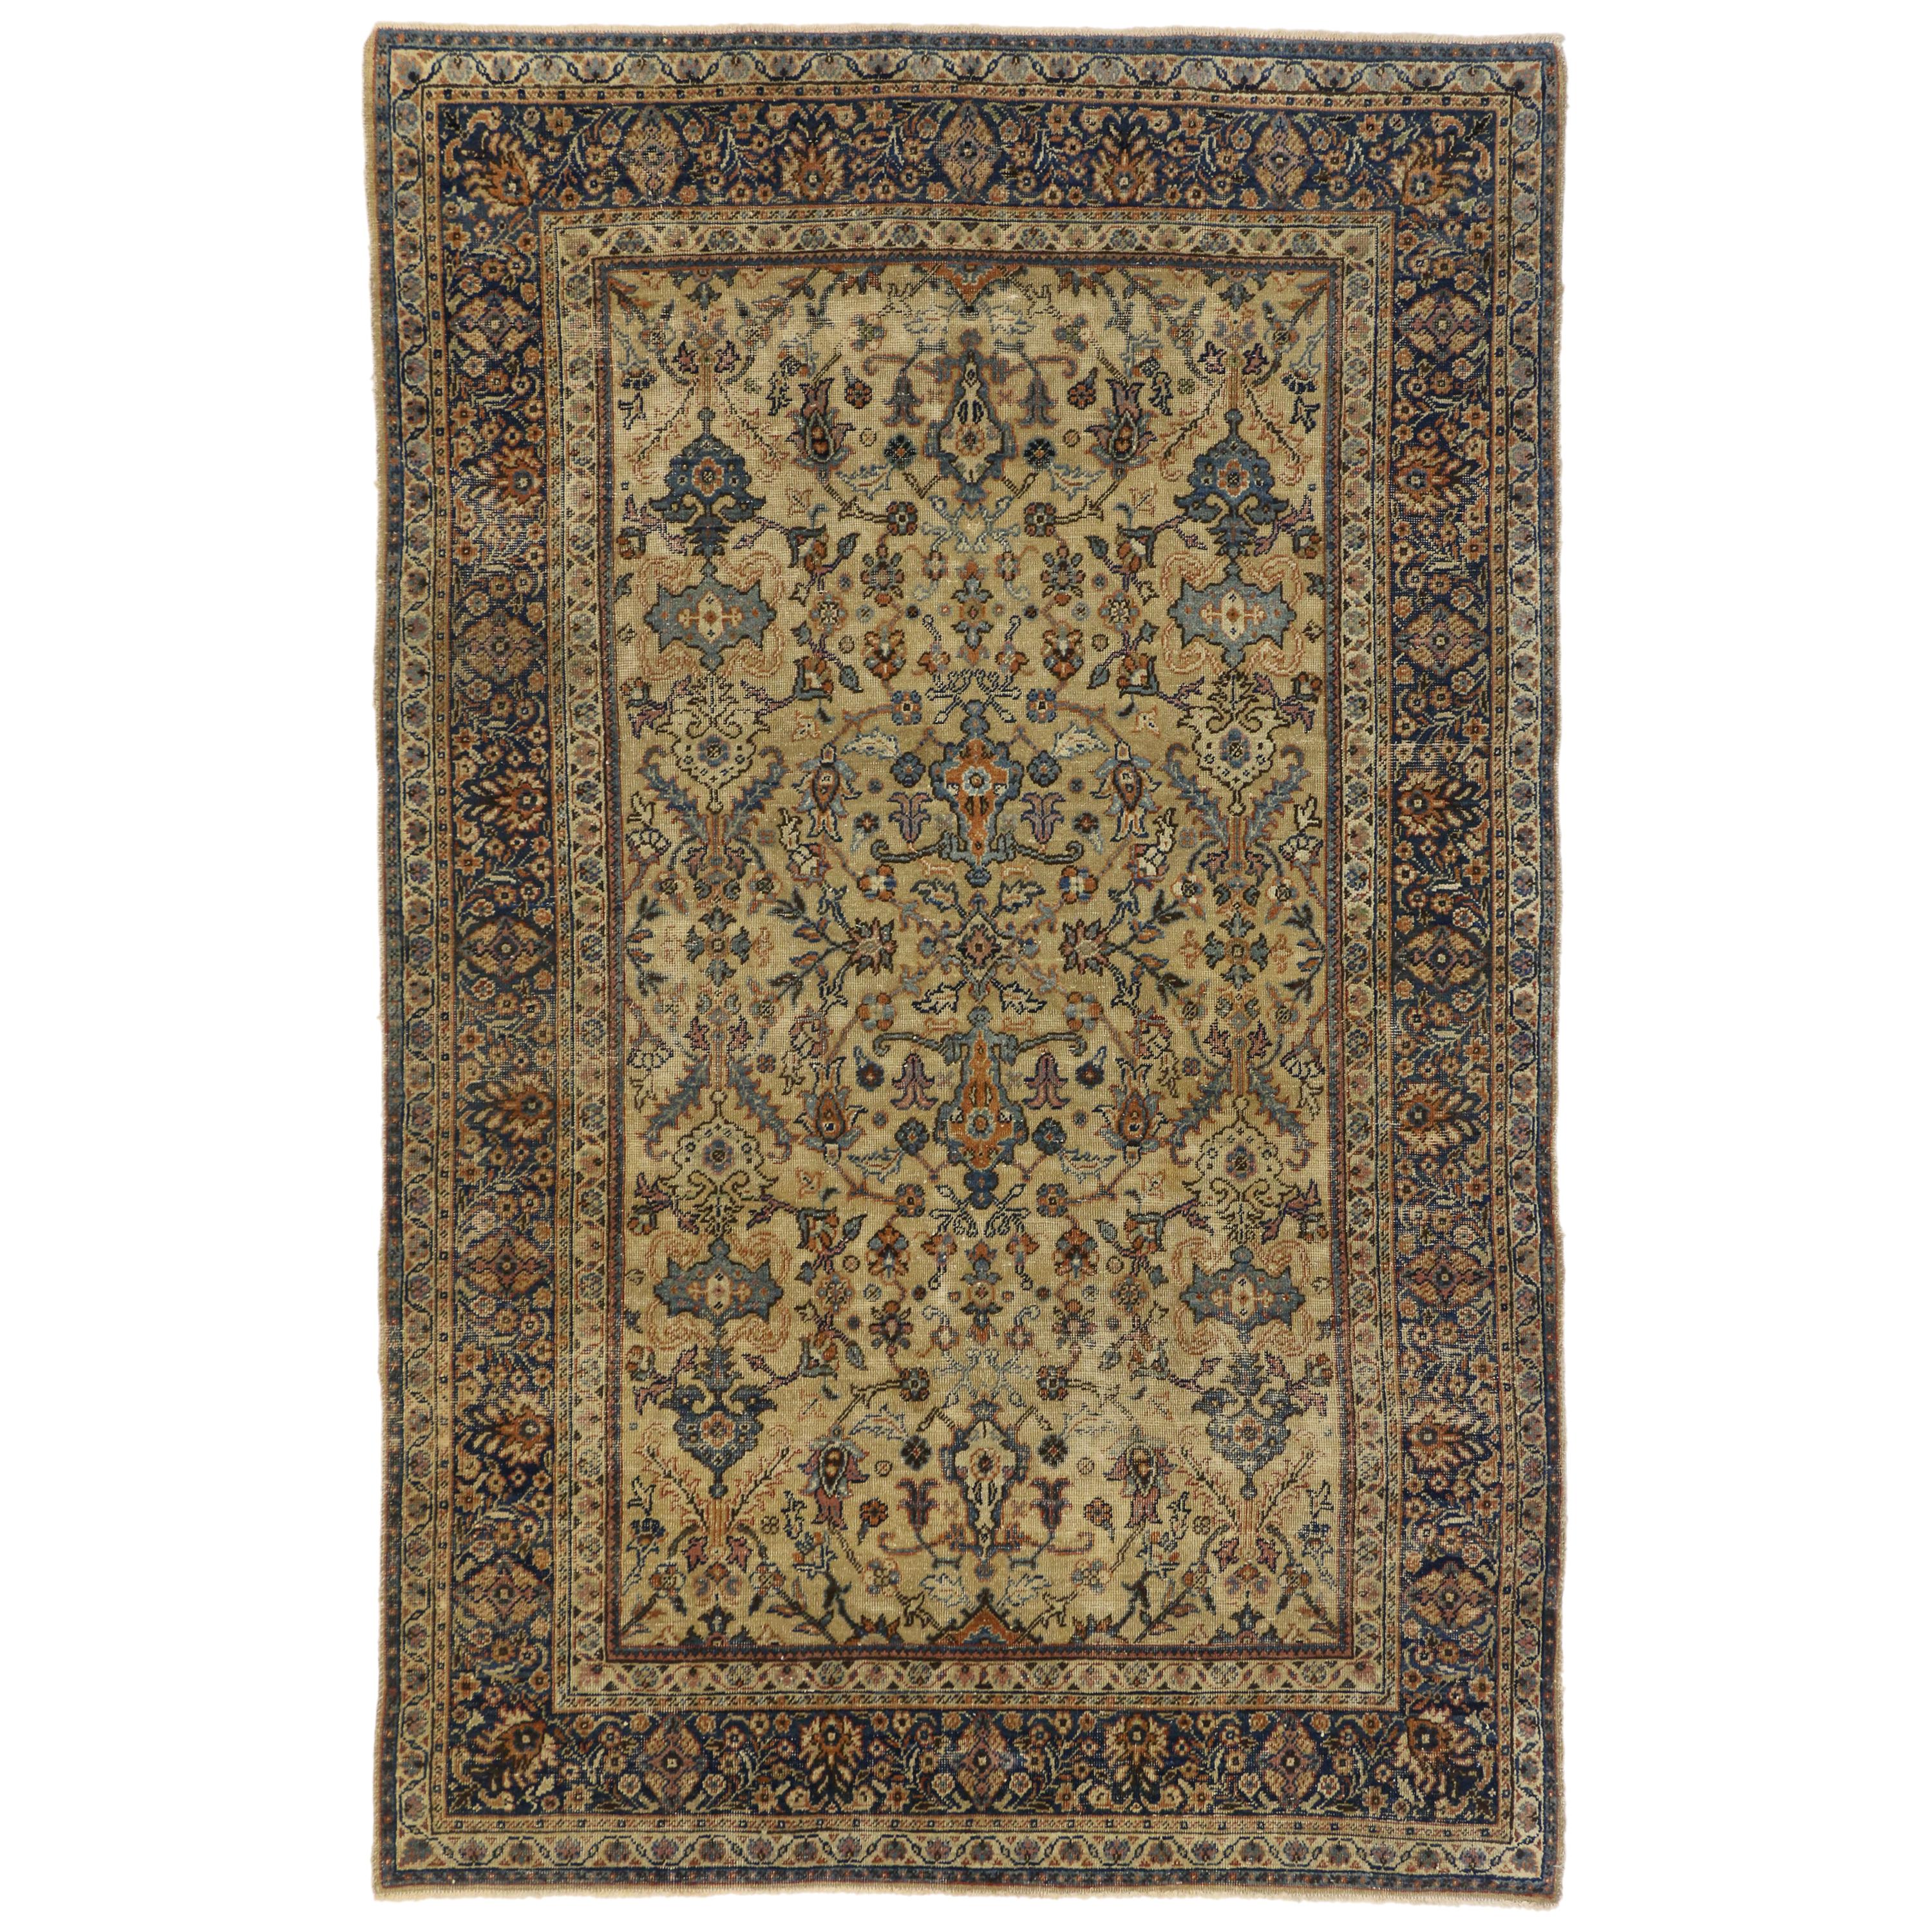 Distressed Antique Persian Sultanabad Rug with Rustic Spanish Colonial Style For Sale